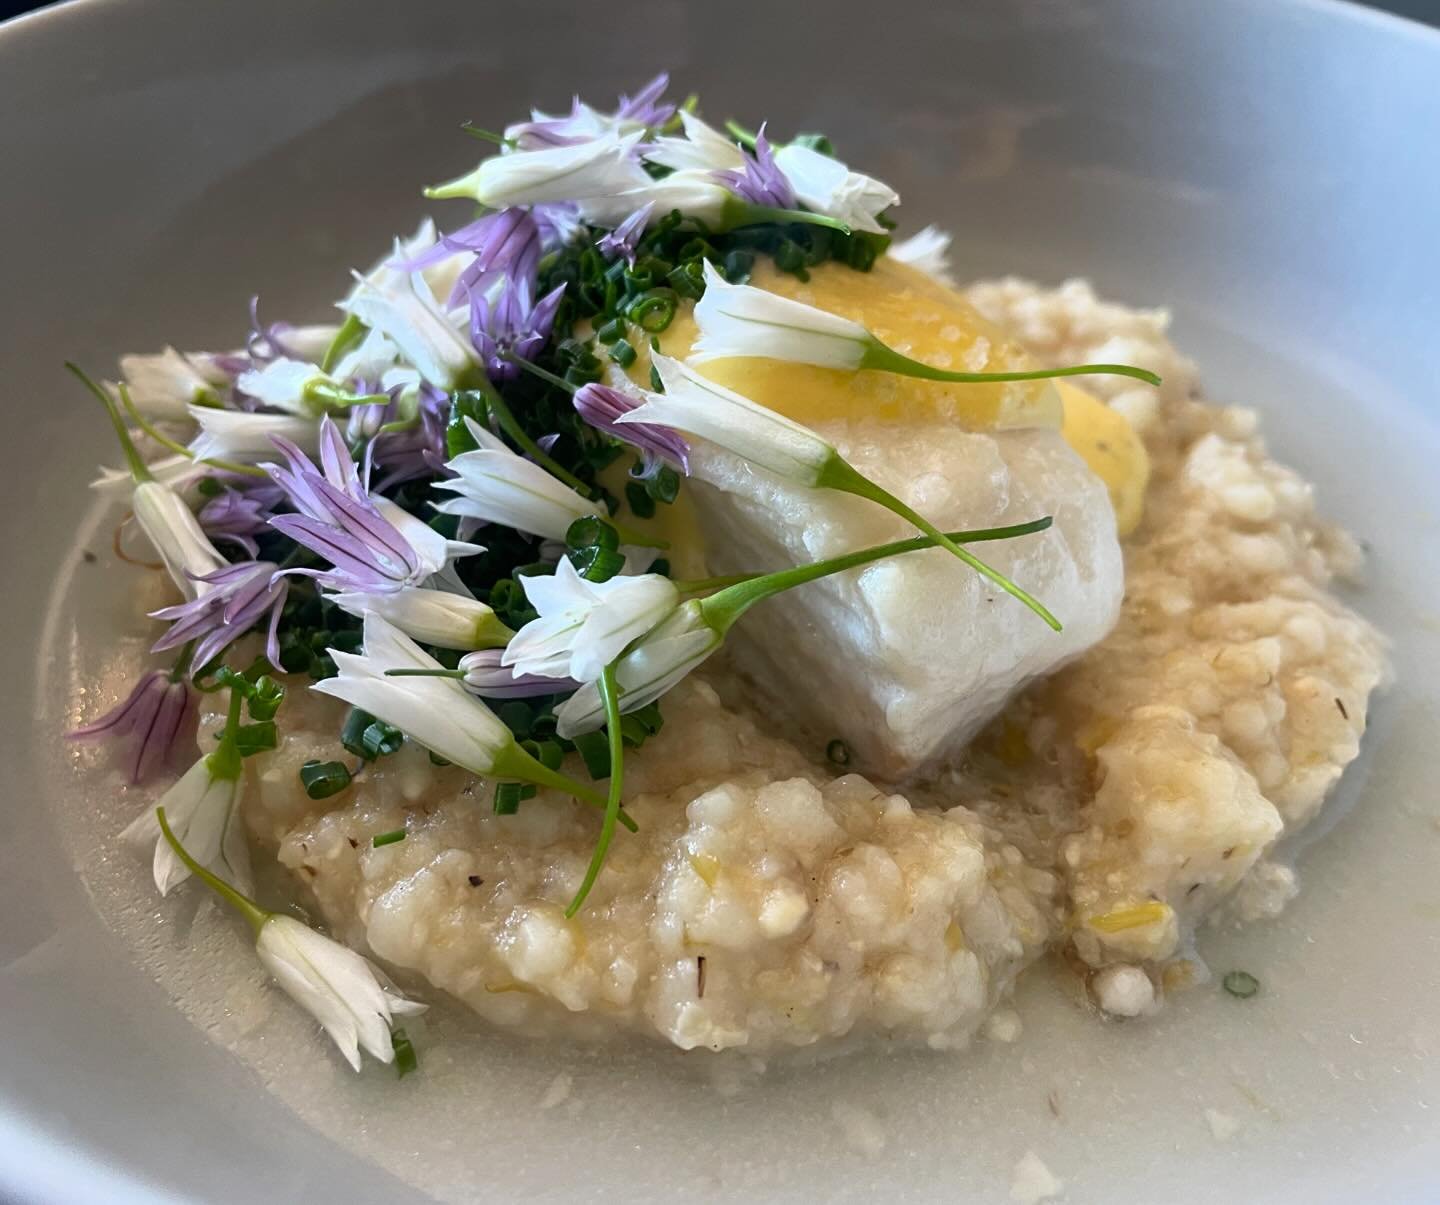 Seating 4-10 today 🌞! 

📸 New Halibut on the menu this weekend 🌿
Butter-Coconut poached, savory lemon black truffle curd, charred scallion @ansonmills grits 🌸 

Plus Mark&rsquo;s free wine tasting 4-5!